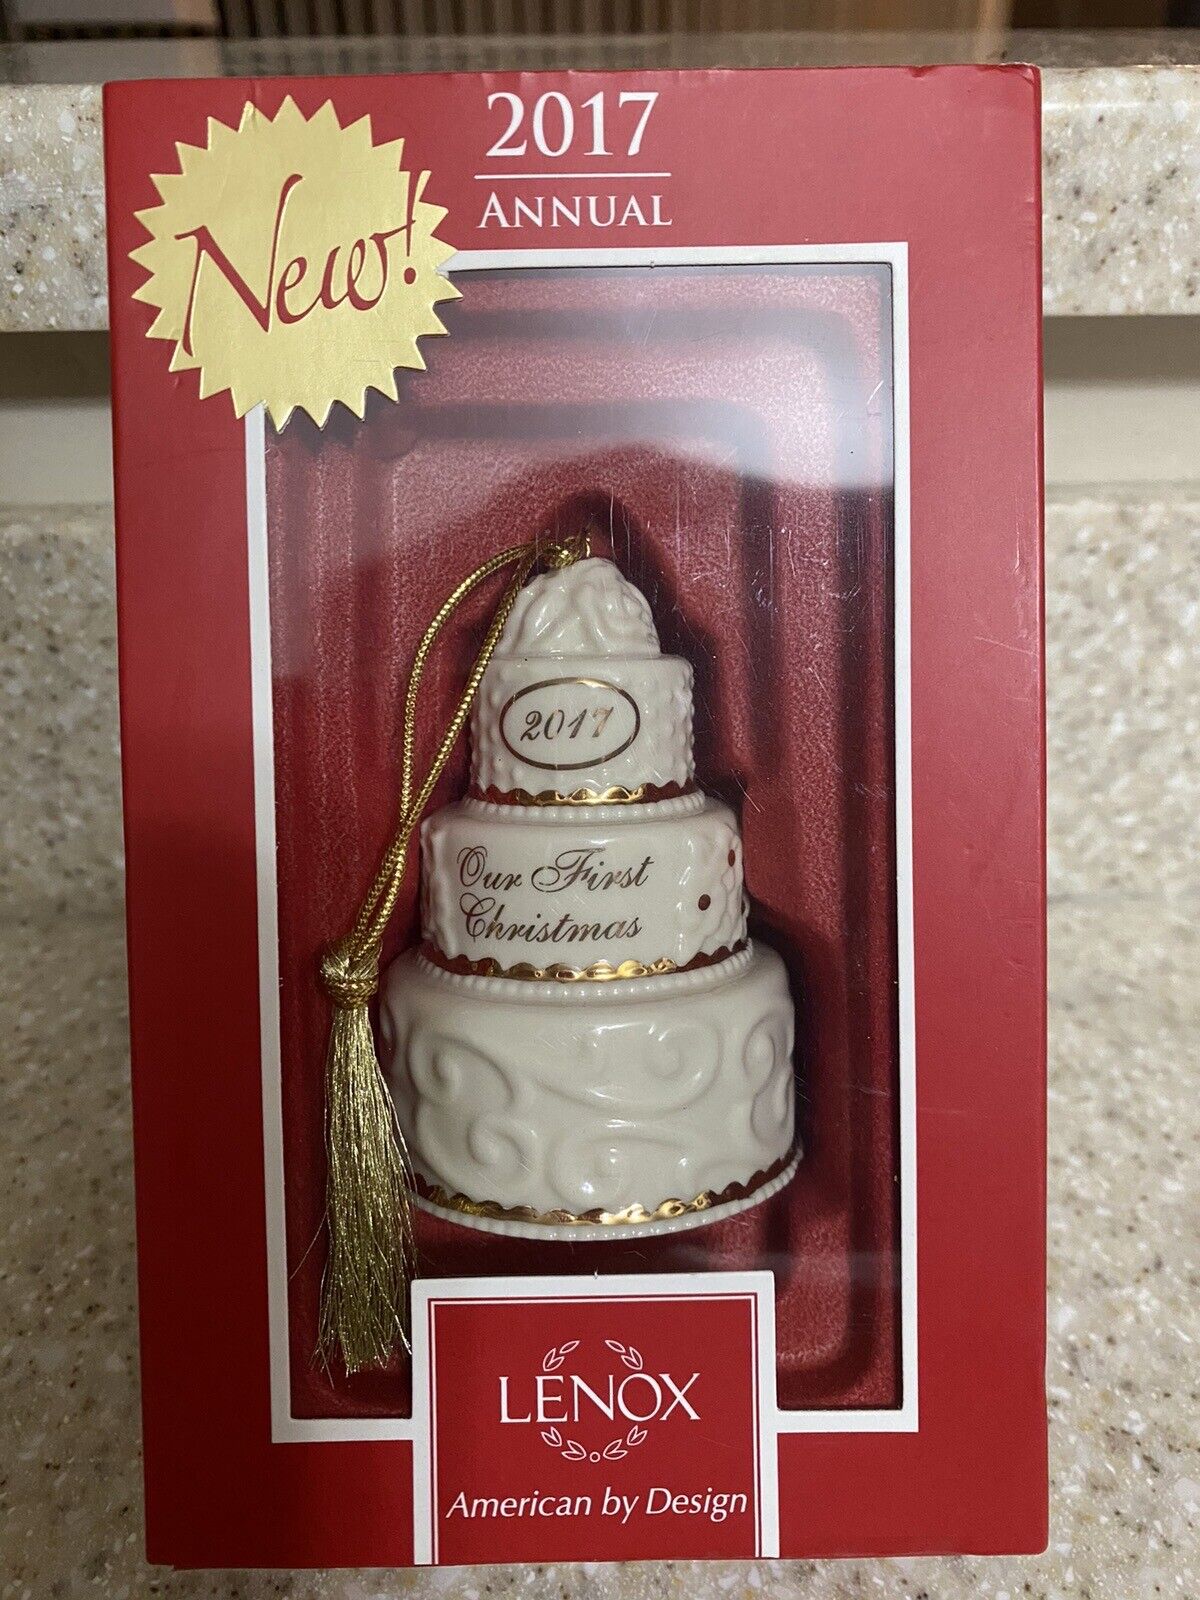 2017 Lenox Ornament Our First Christmas Together Cake With Original Box